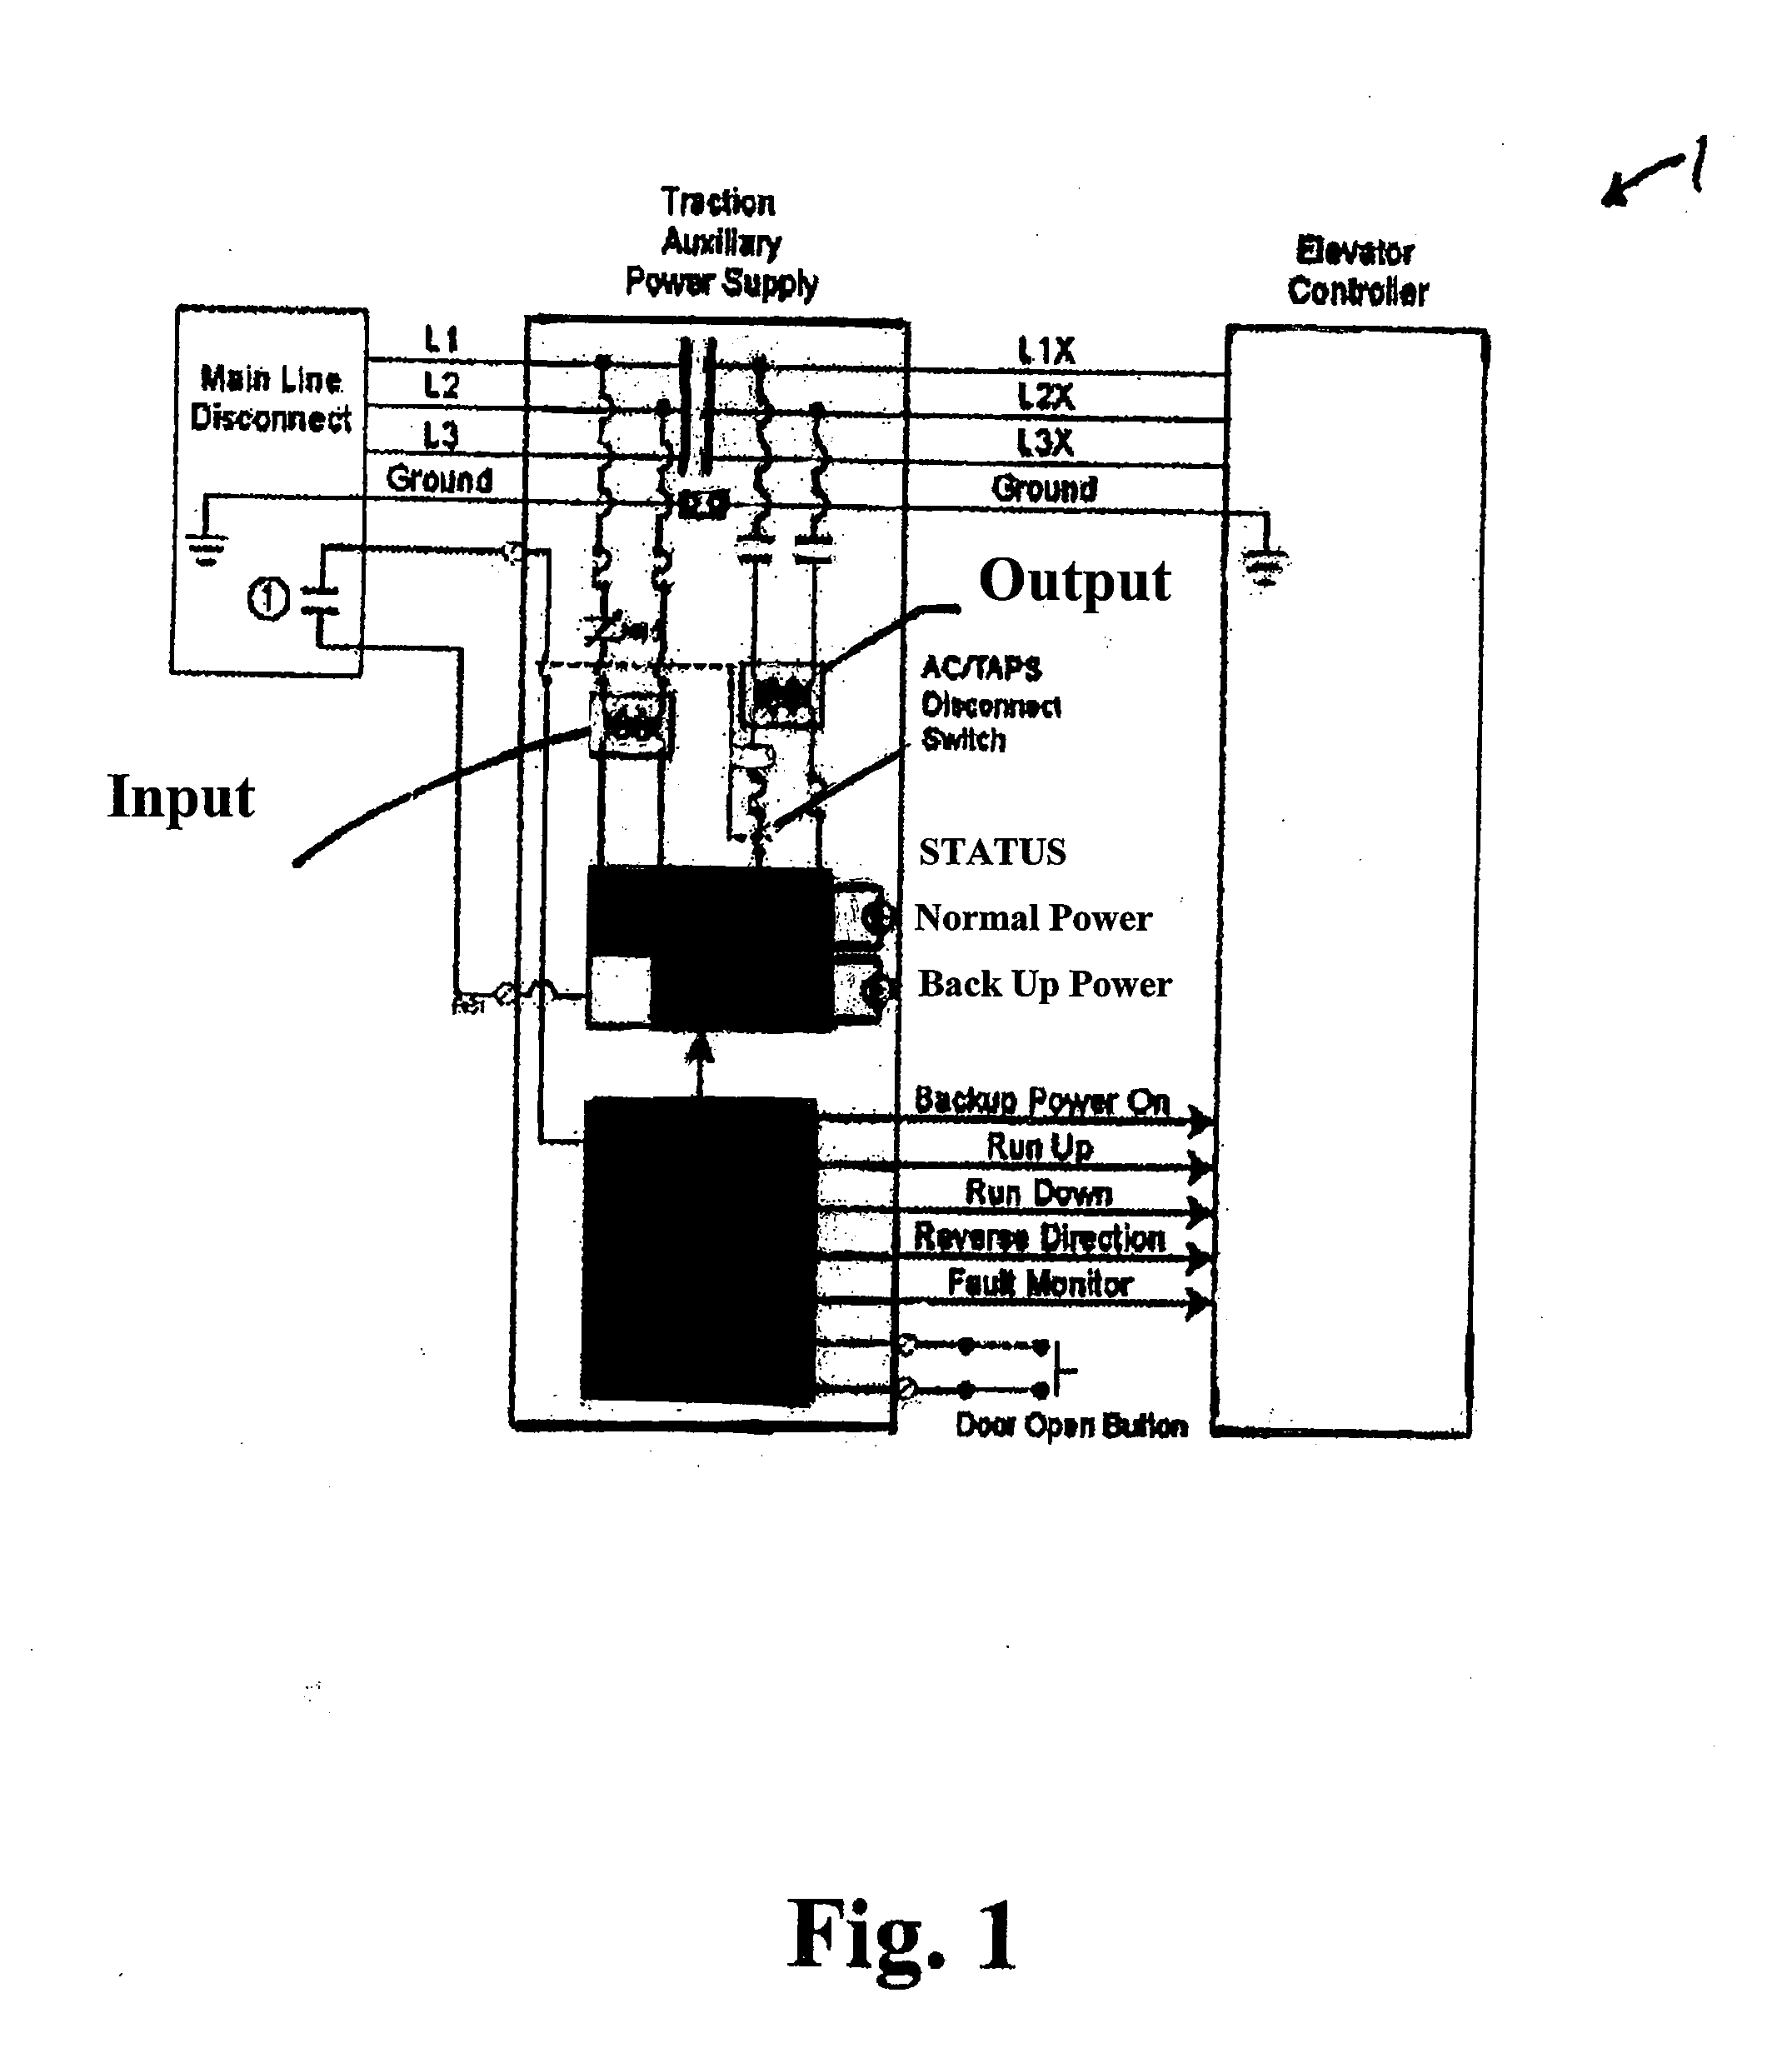 Auxiliary power supply apparatus and method